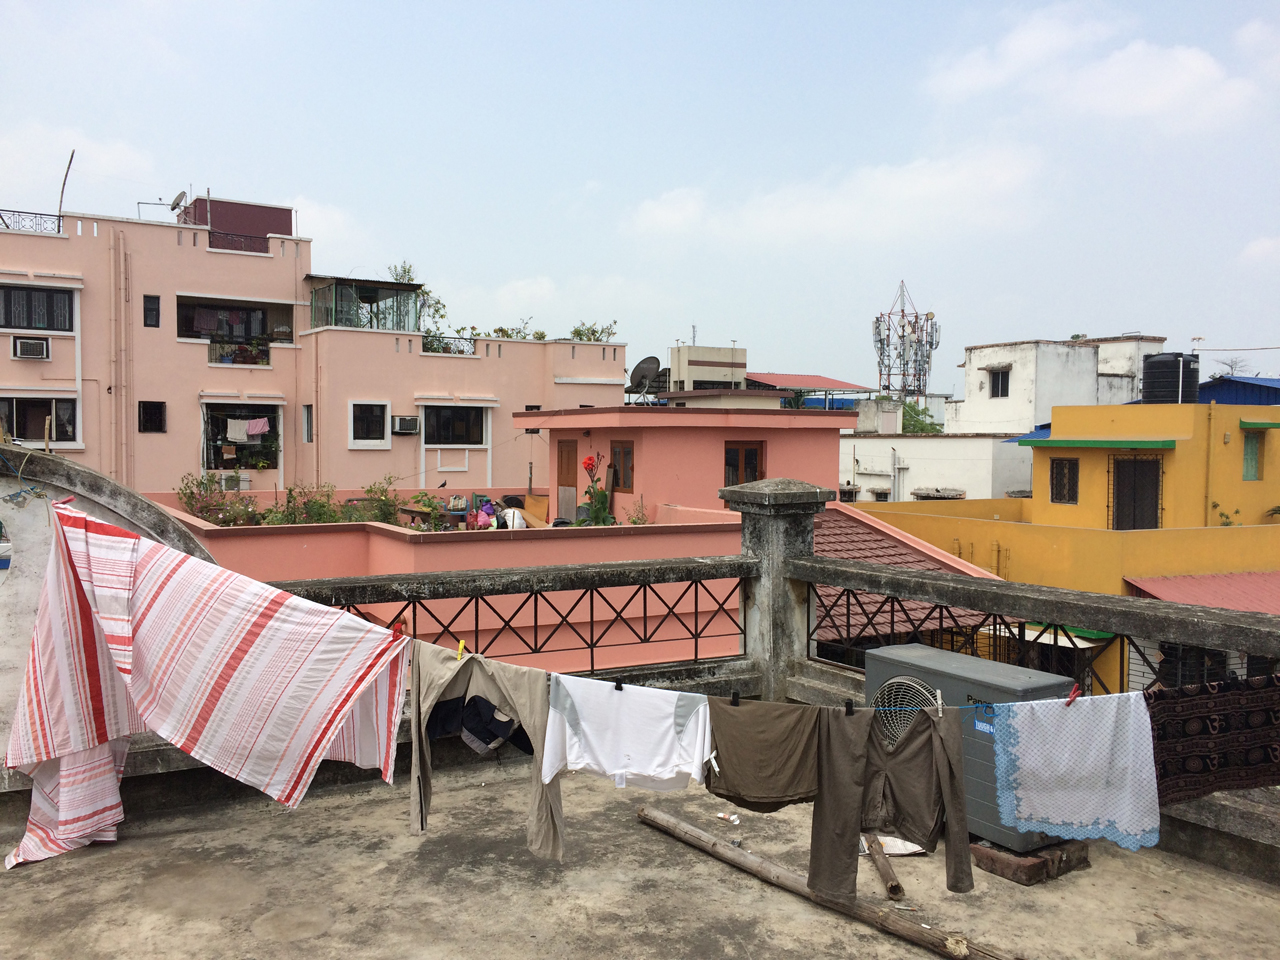 Rooftop with a clothes line